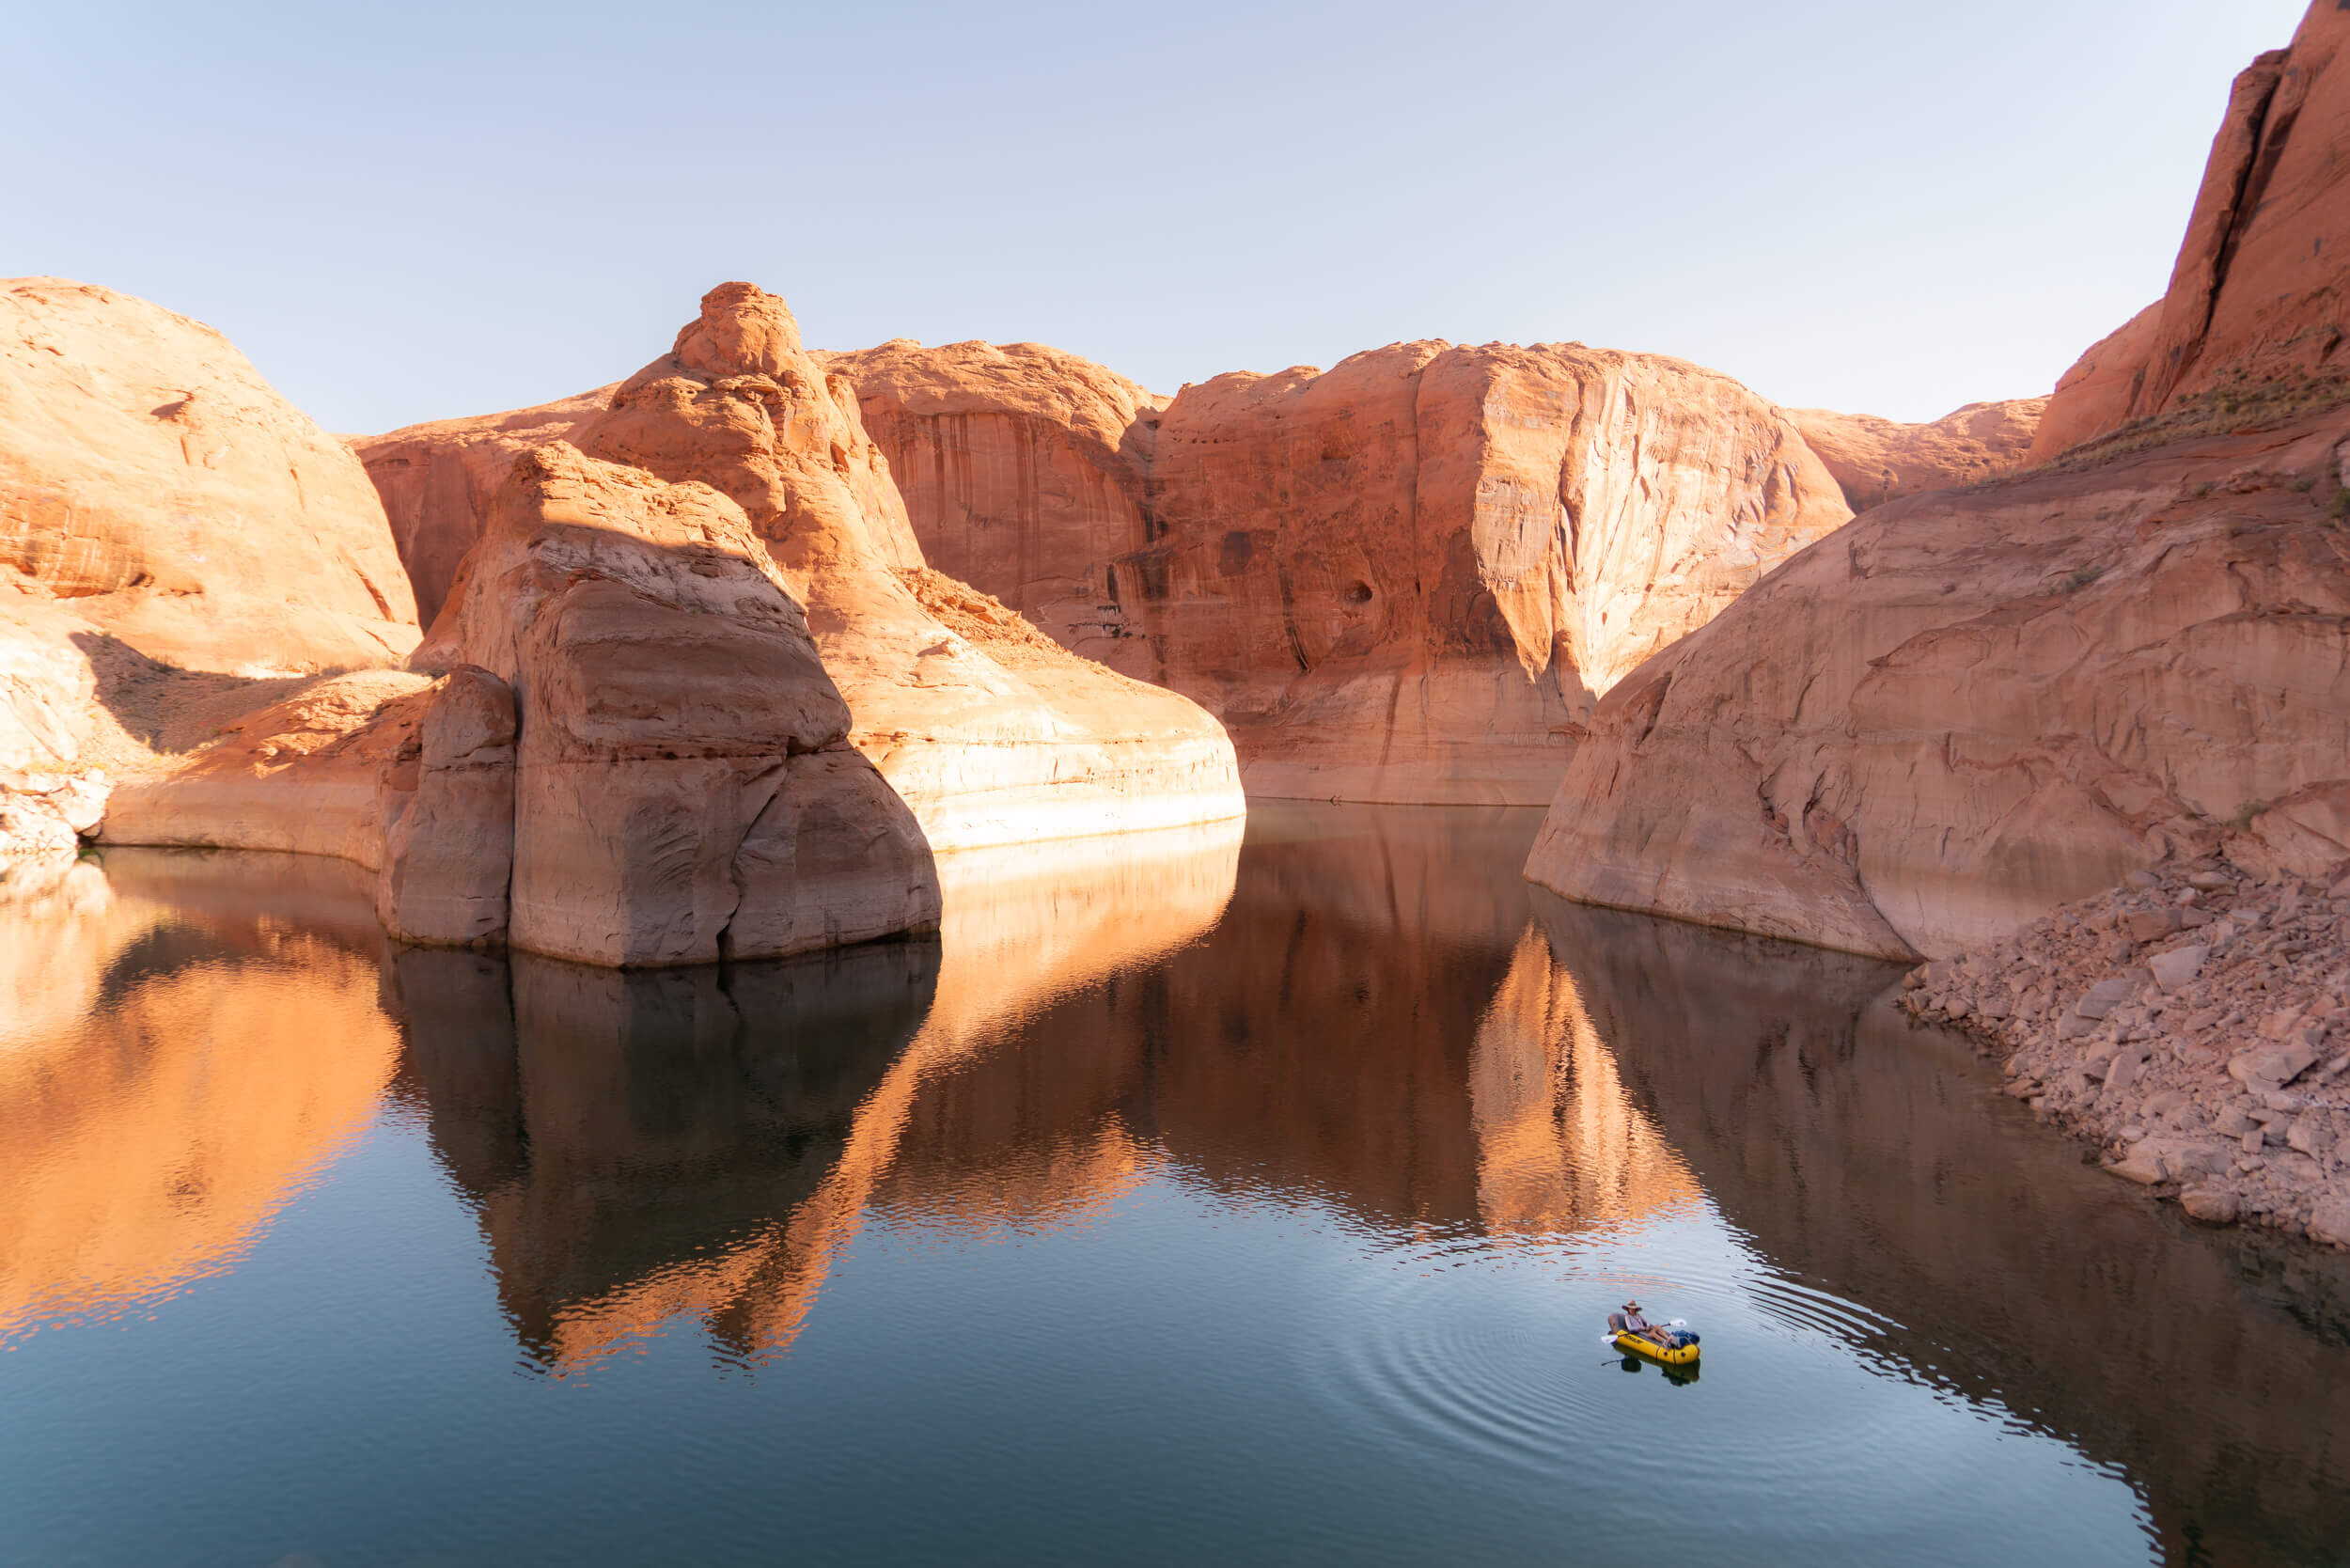 Calm mornings on Lake Powell. The reflections were unreal!